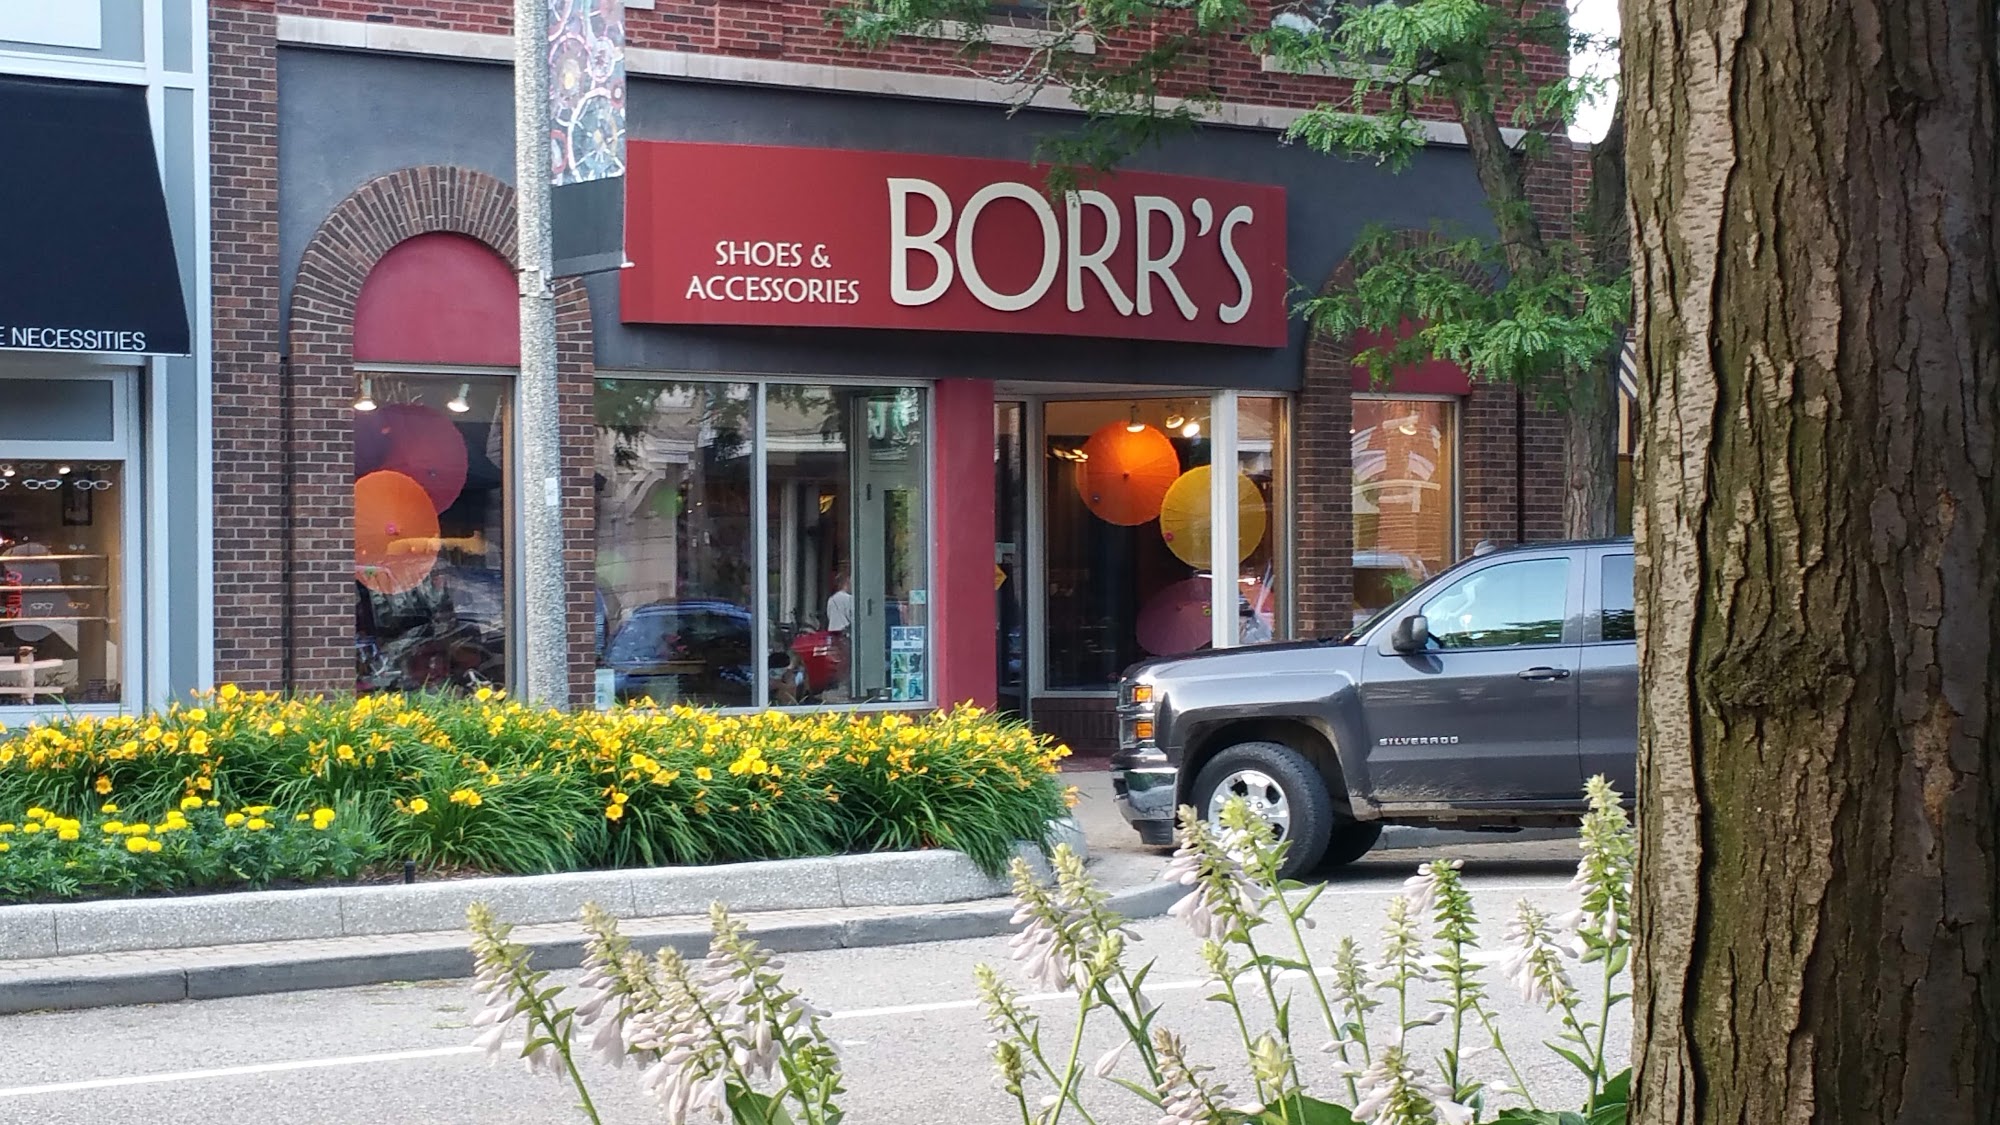 Borrs Shoes and Accessories